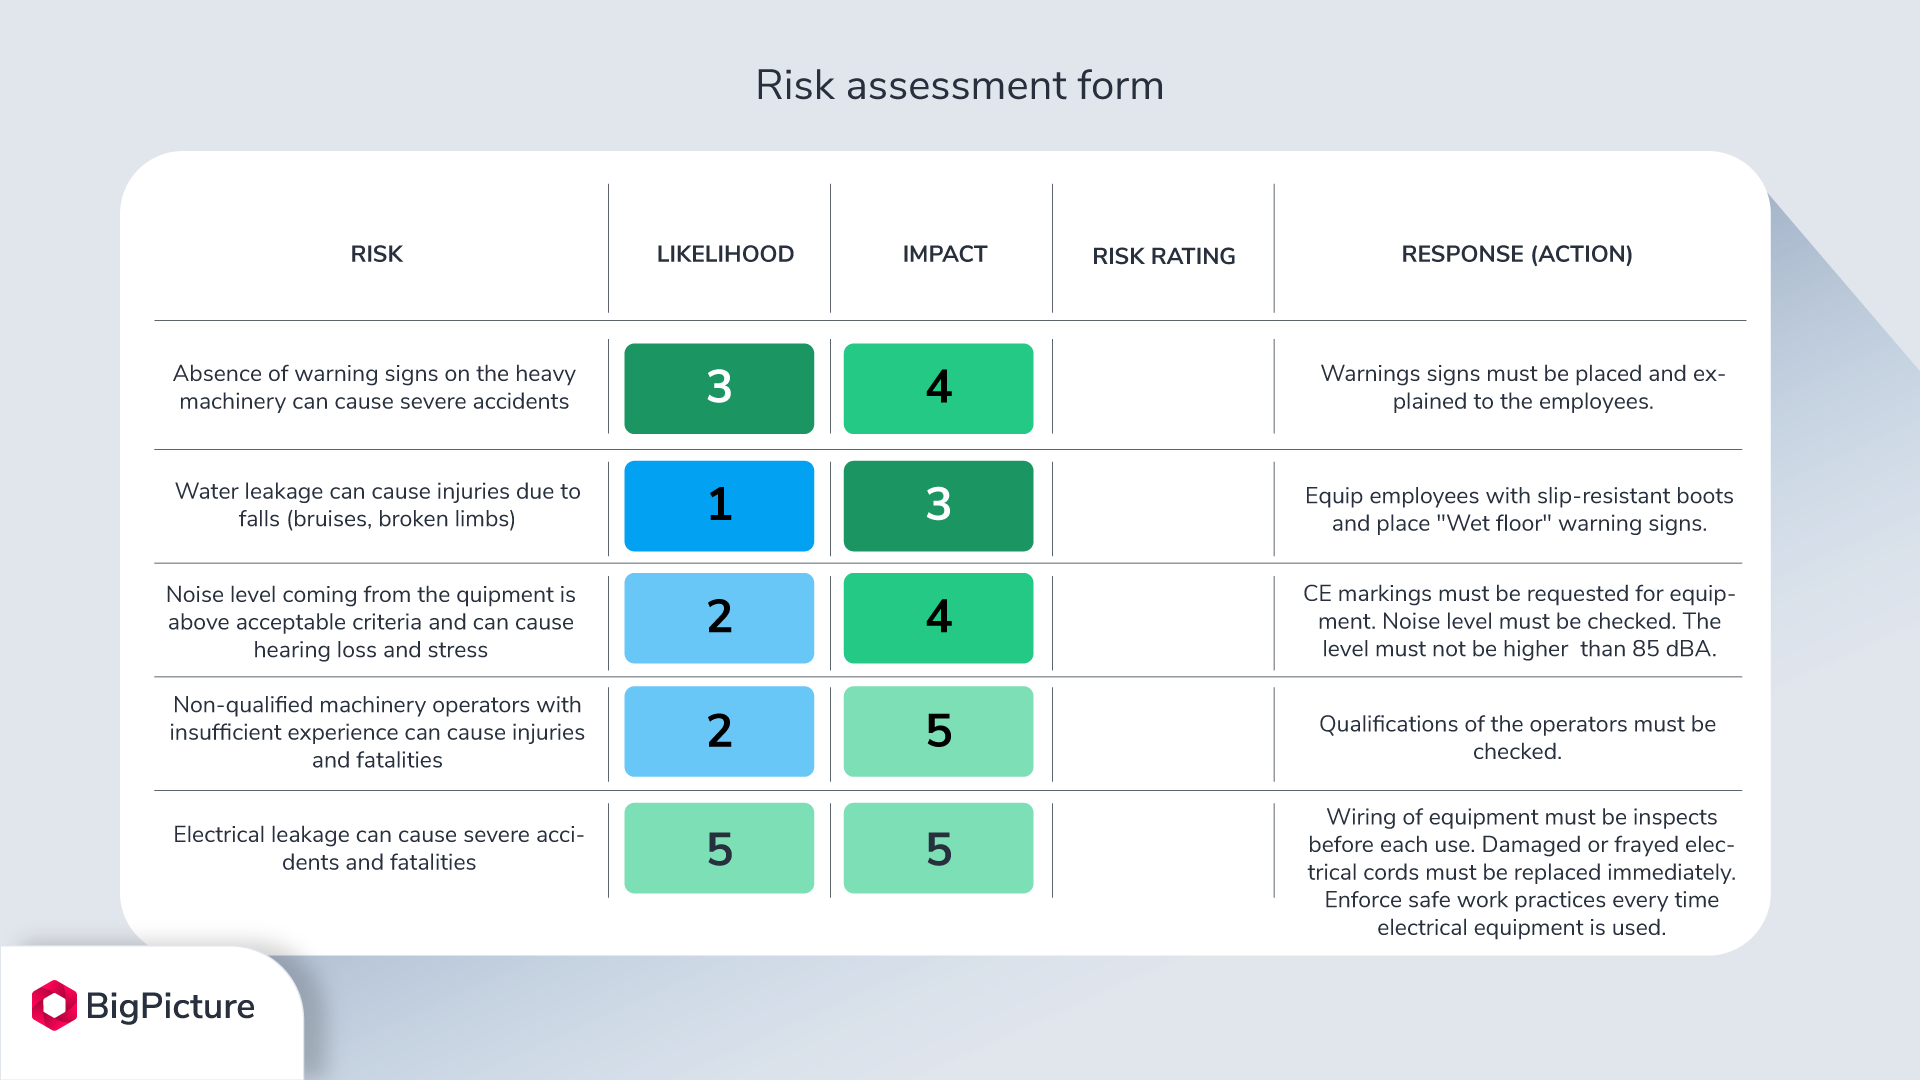 Risk assessment form in color - likelihood and impact columns are filled with numbers.